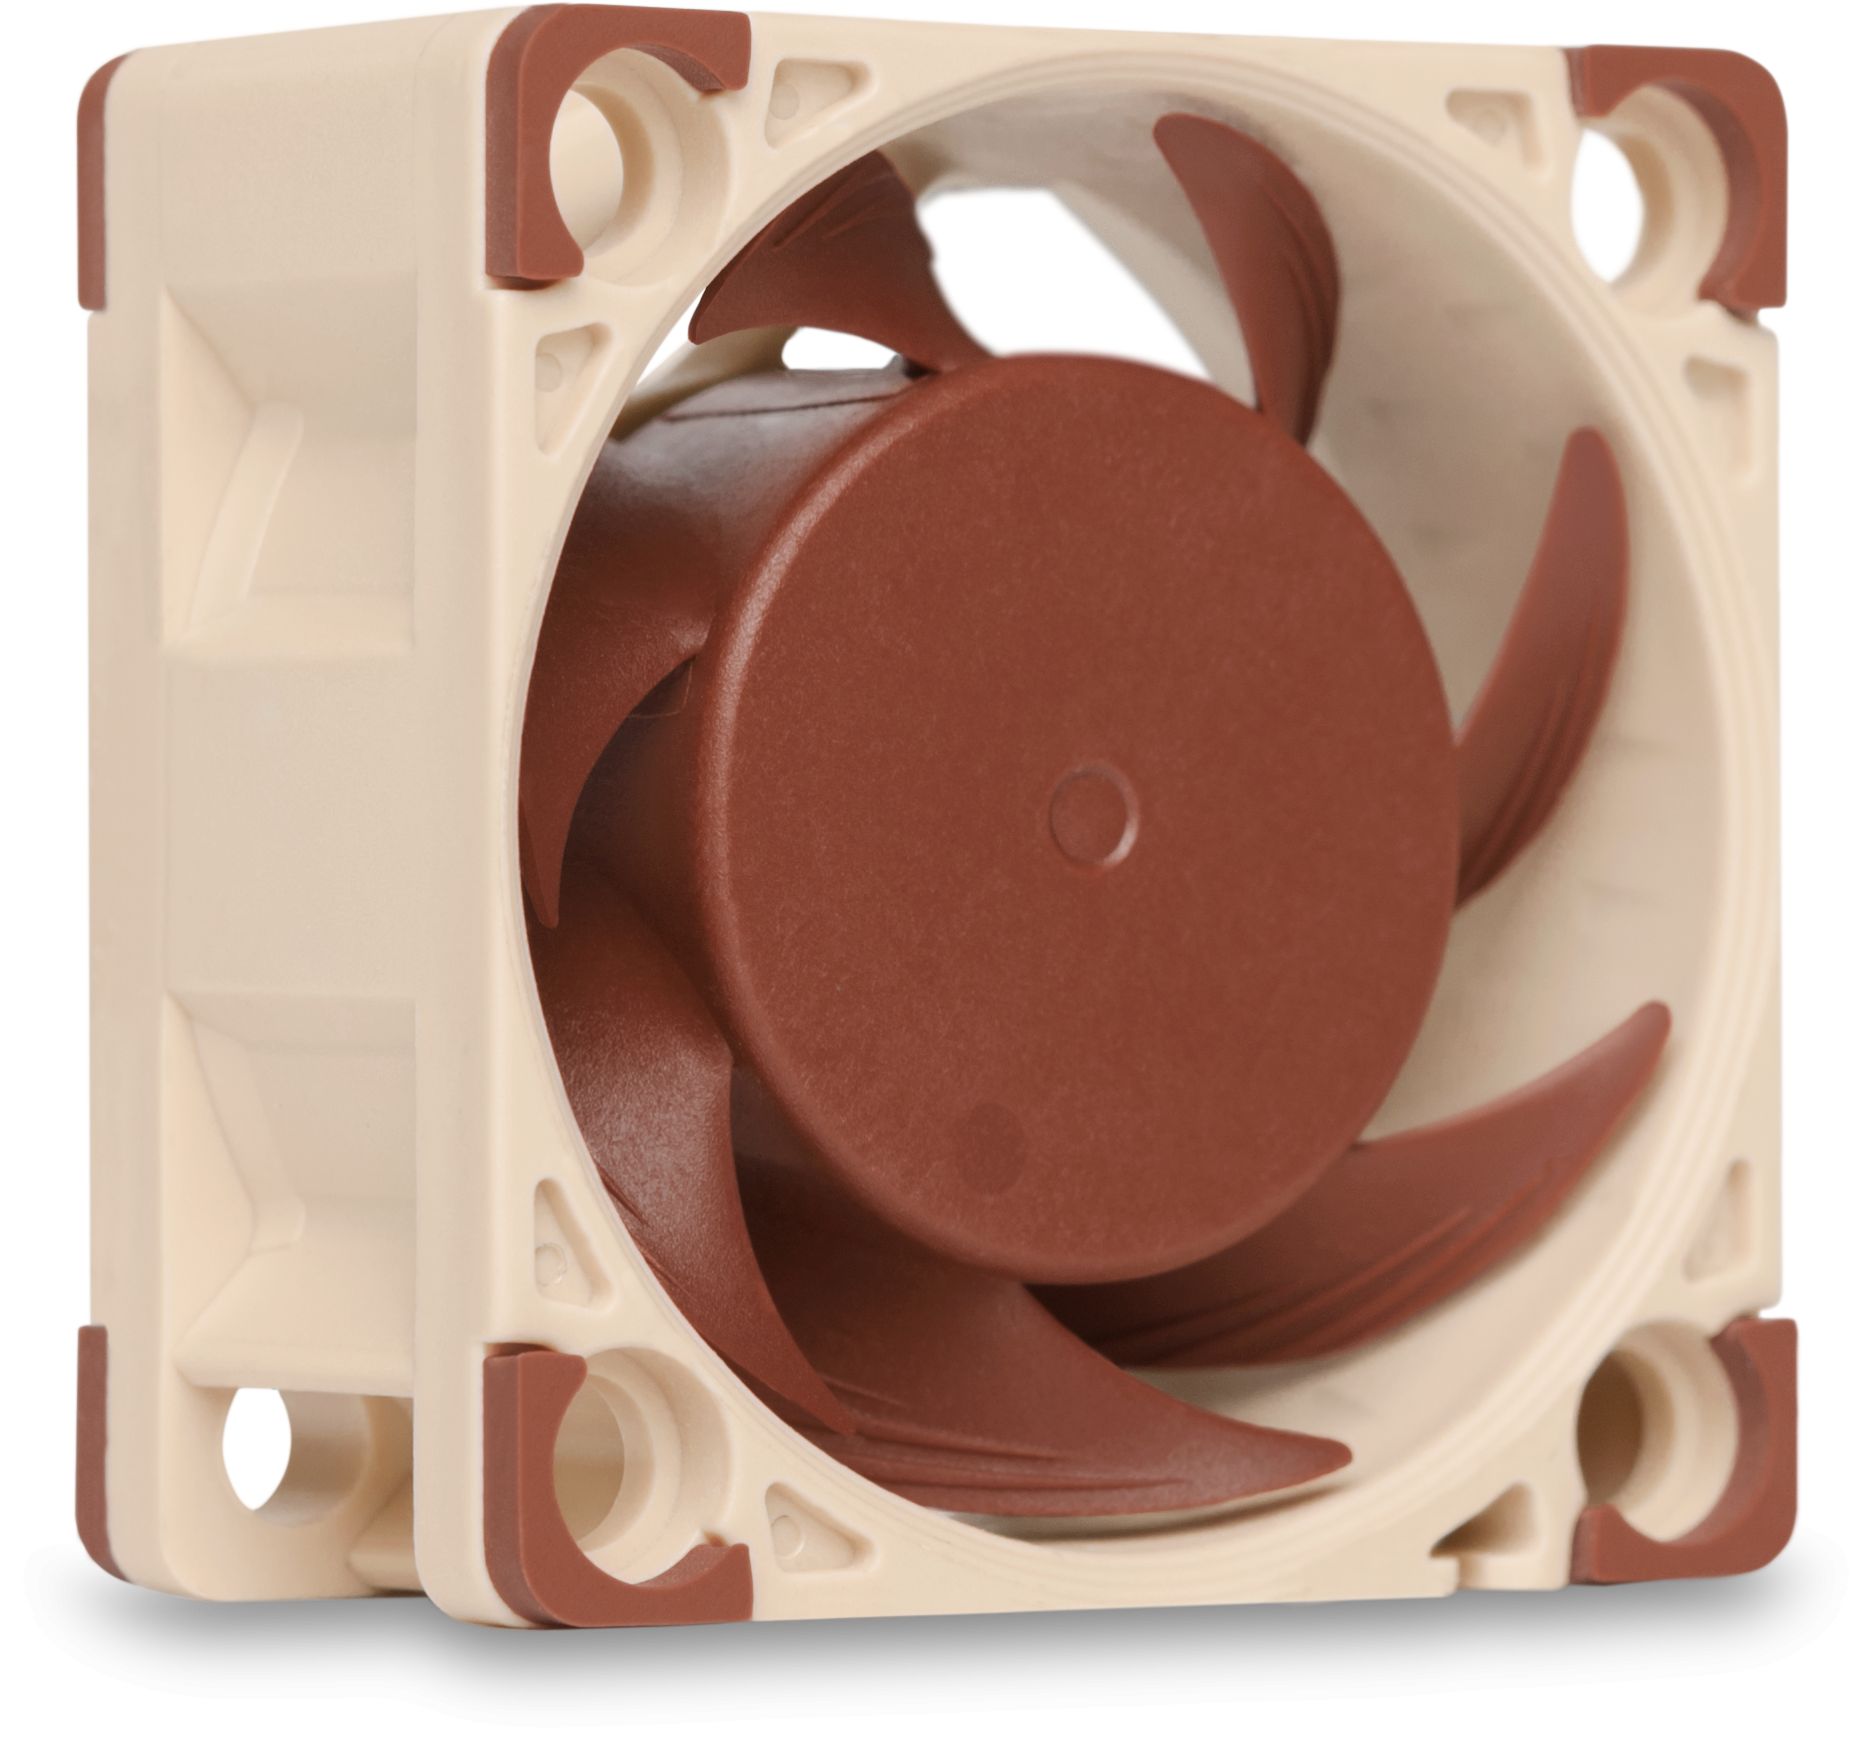 Noctua A-Series Cooling Fan Blades with AAO Frame SSO2 Bearing NF-A4X10-FLX 